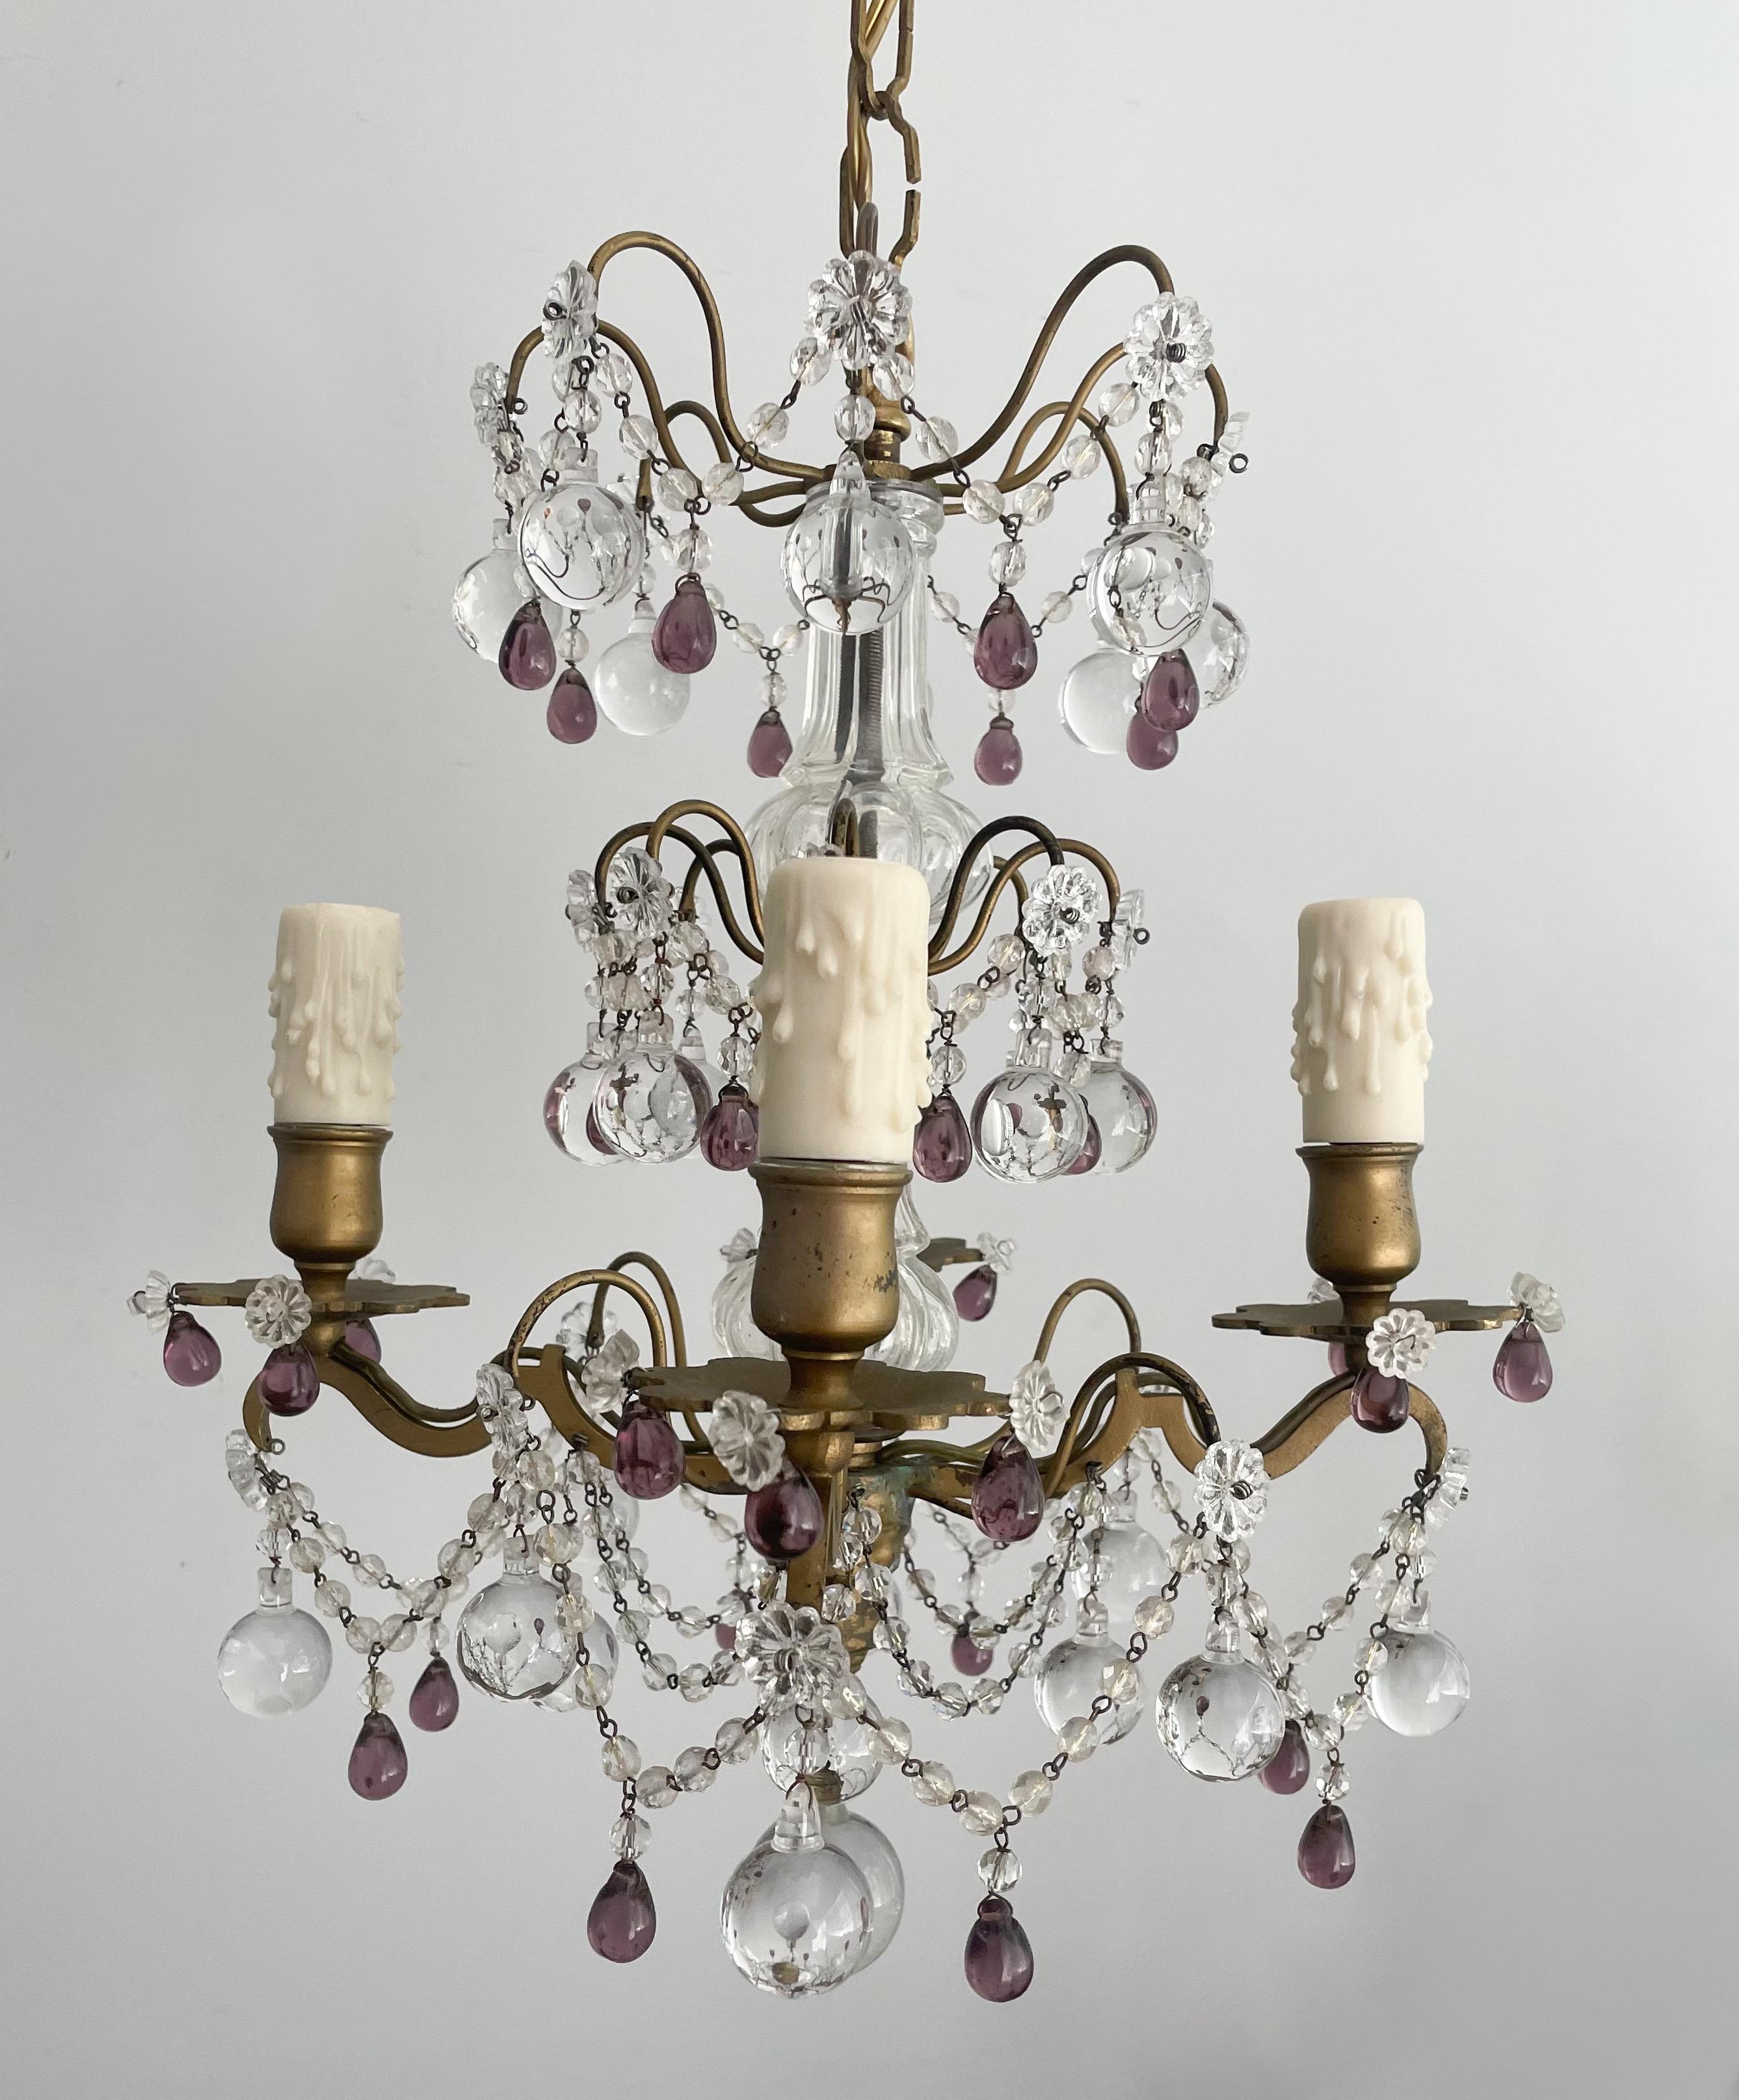 Gorgeous, petite French gilt-iron and crystal chandelier in the Versatile style. 

The chandelier features a small scale scrolled iron frame with clear and amethyst glass decorations. 

The chandelier is wired and in working condition, it